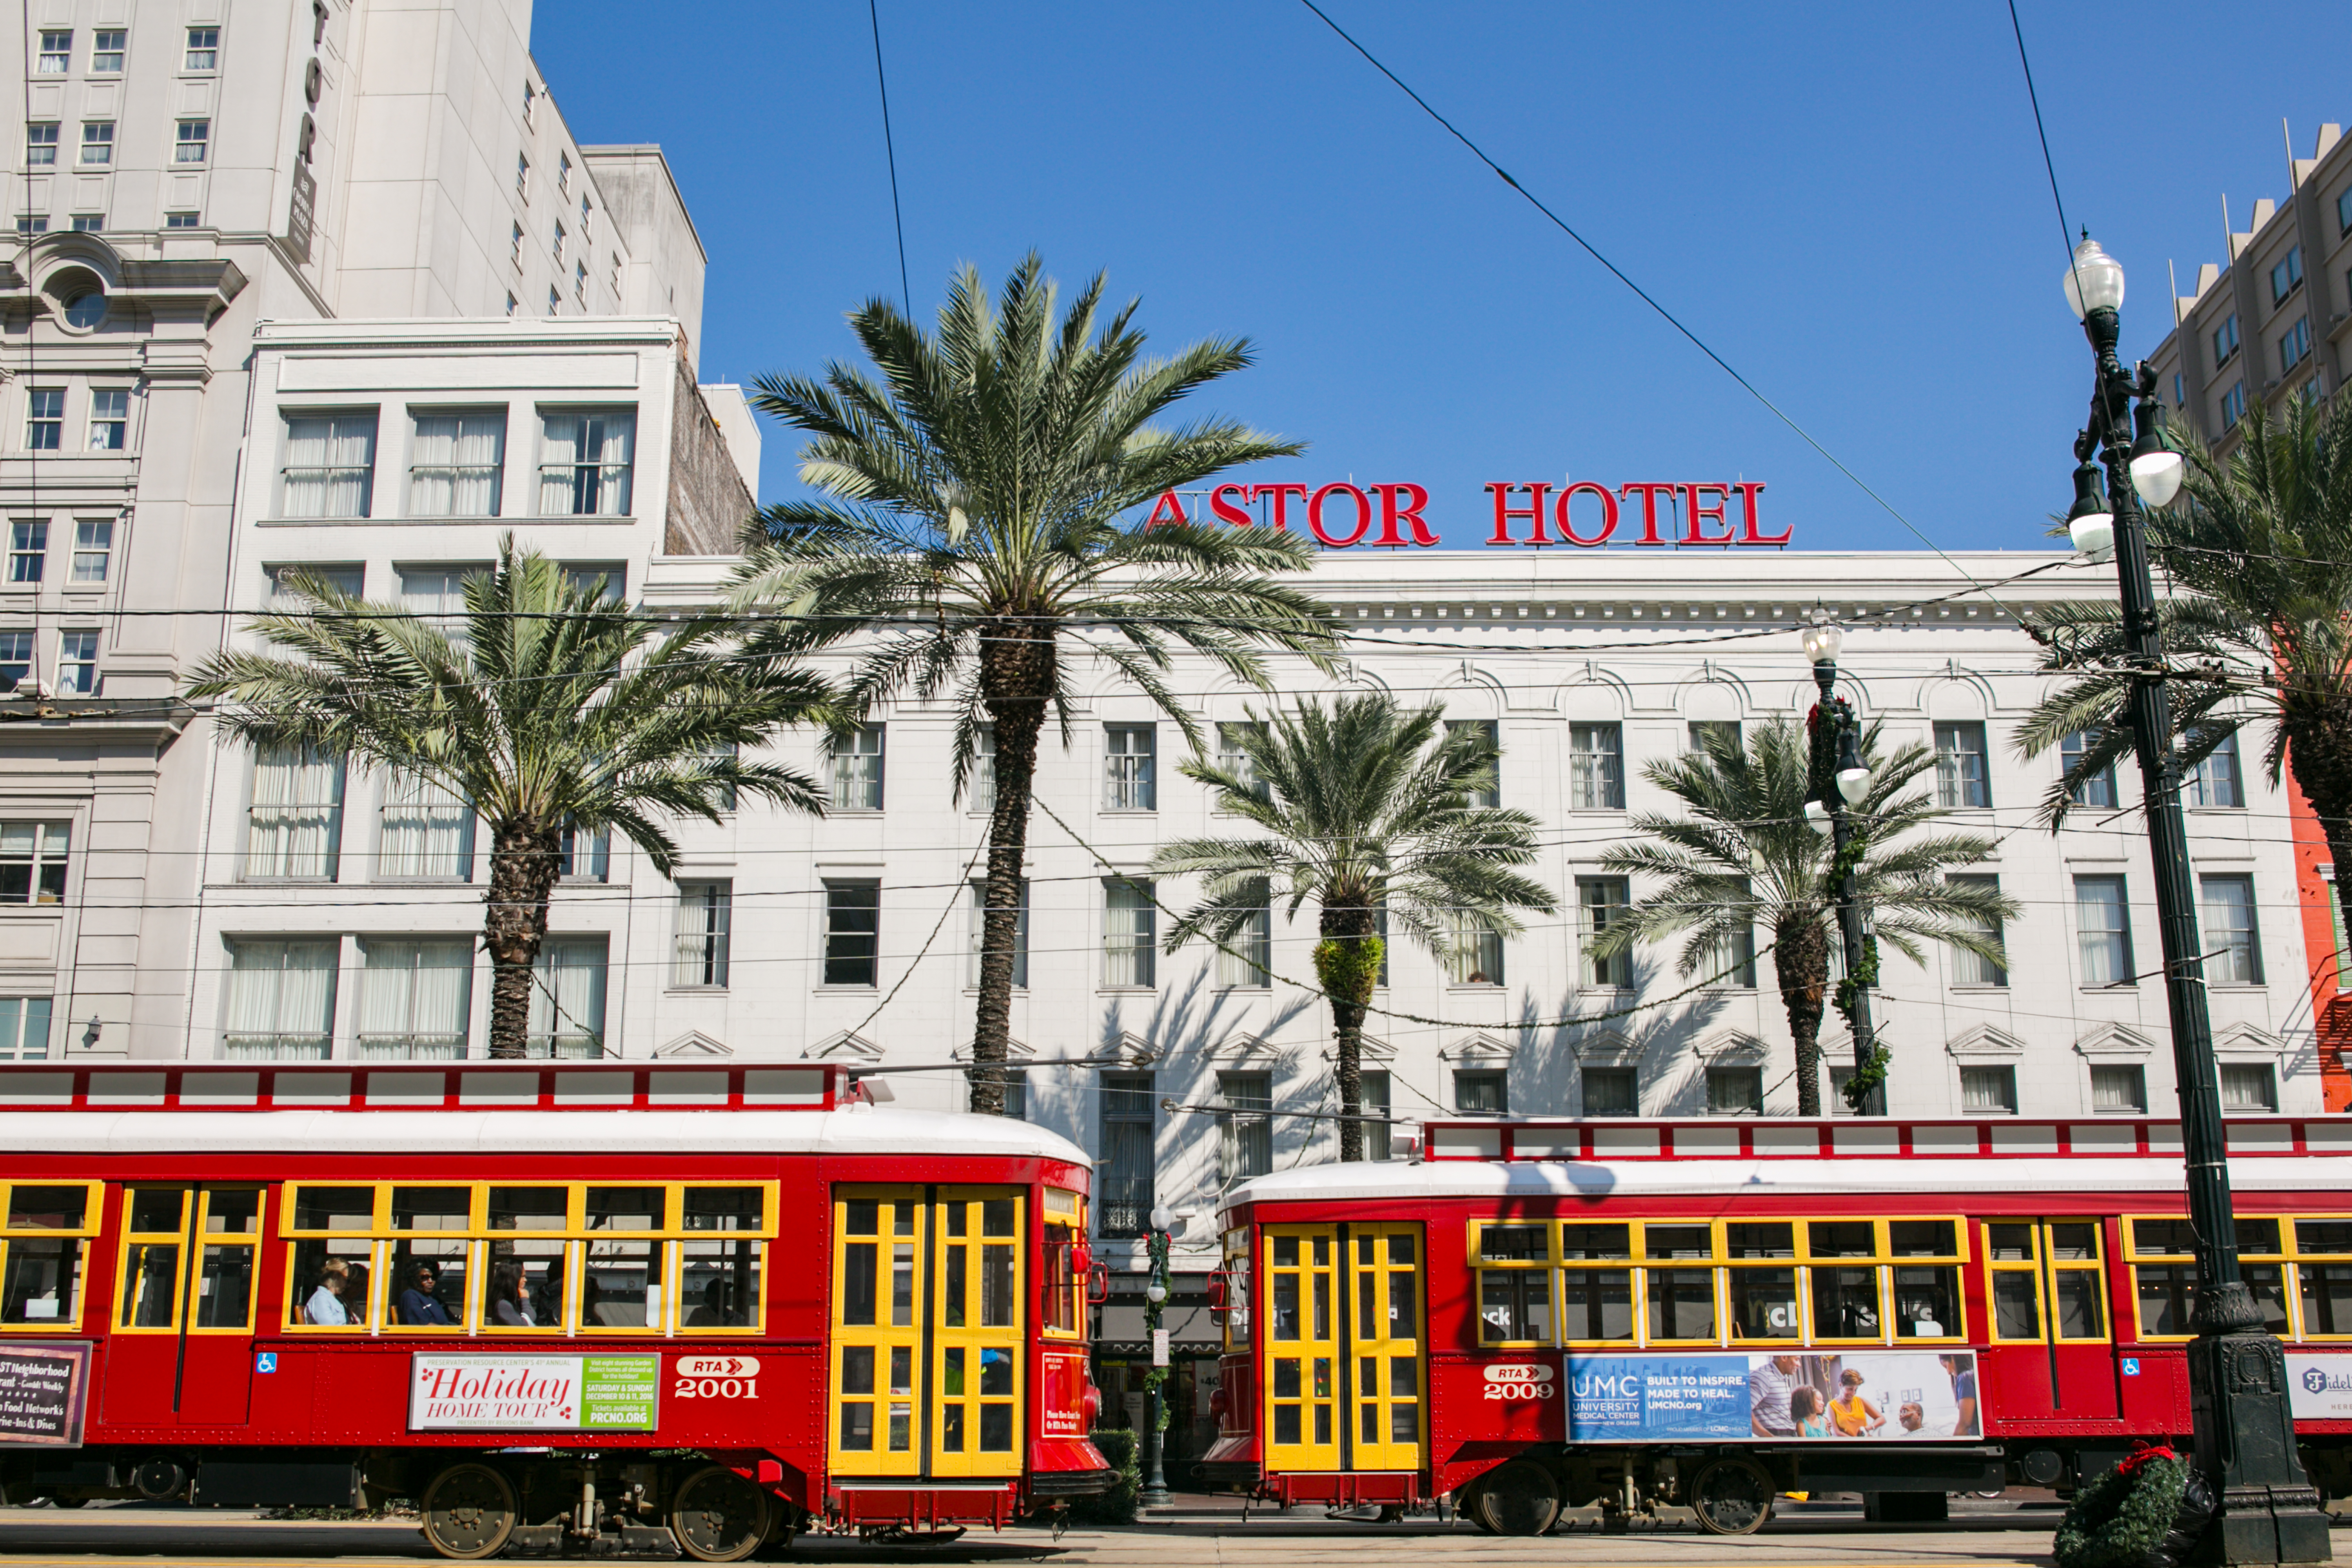 How to get to Louis Vuitton New Orleans Saks by Bus or Streetcar?